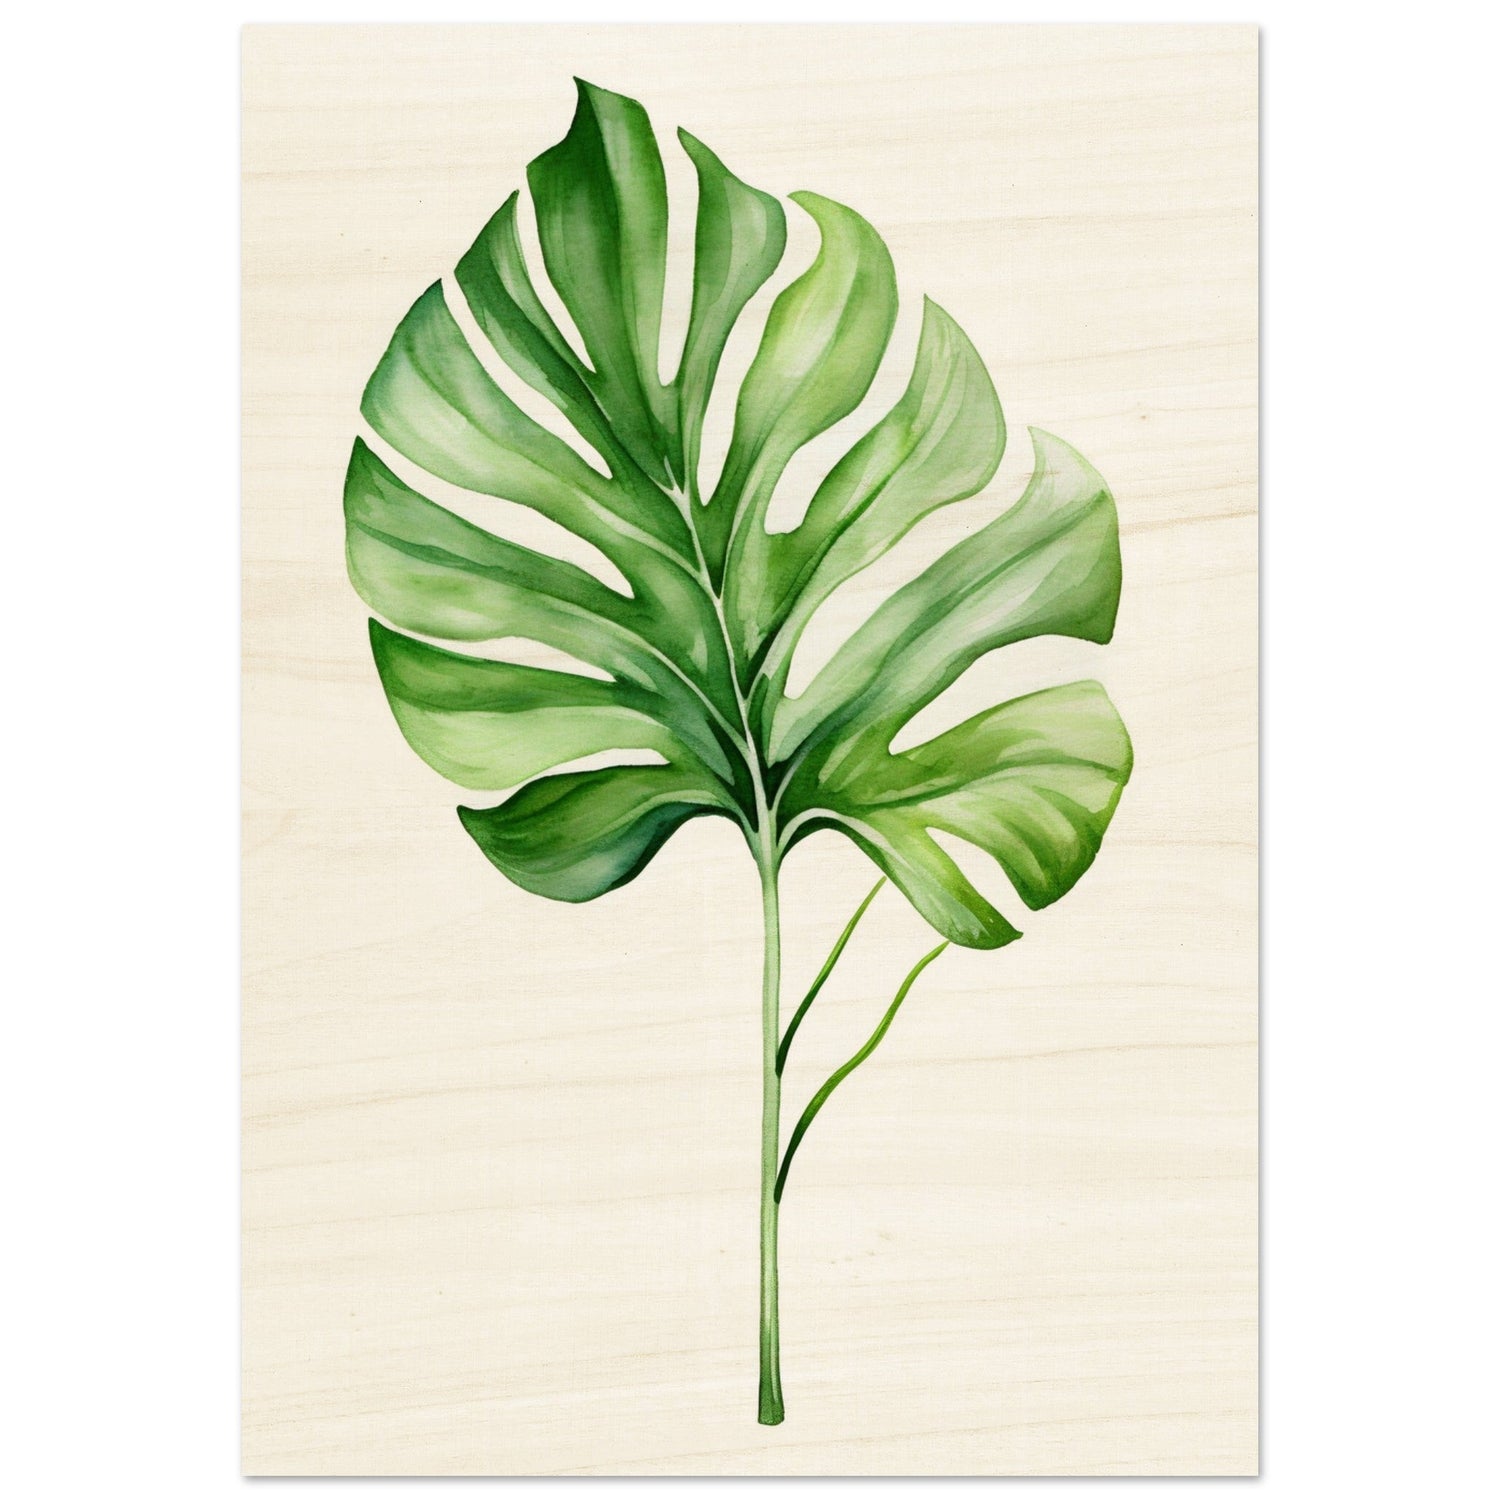 Aquarelles Tropical Leaf B - Wood Prints makes for a stunning poster for my wall.